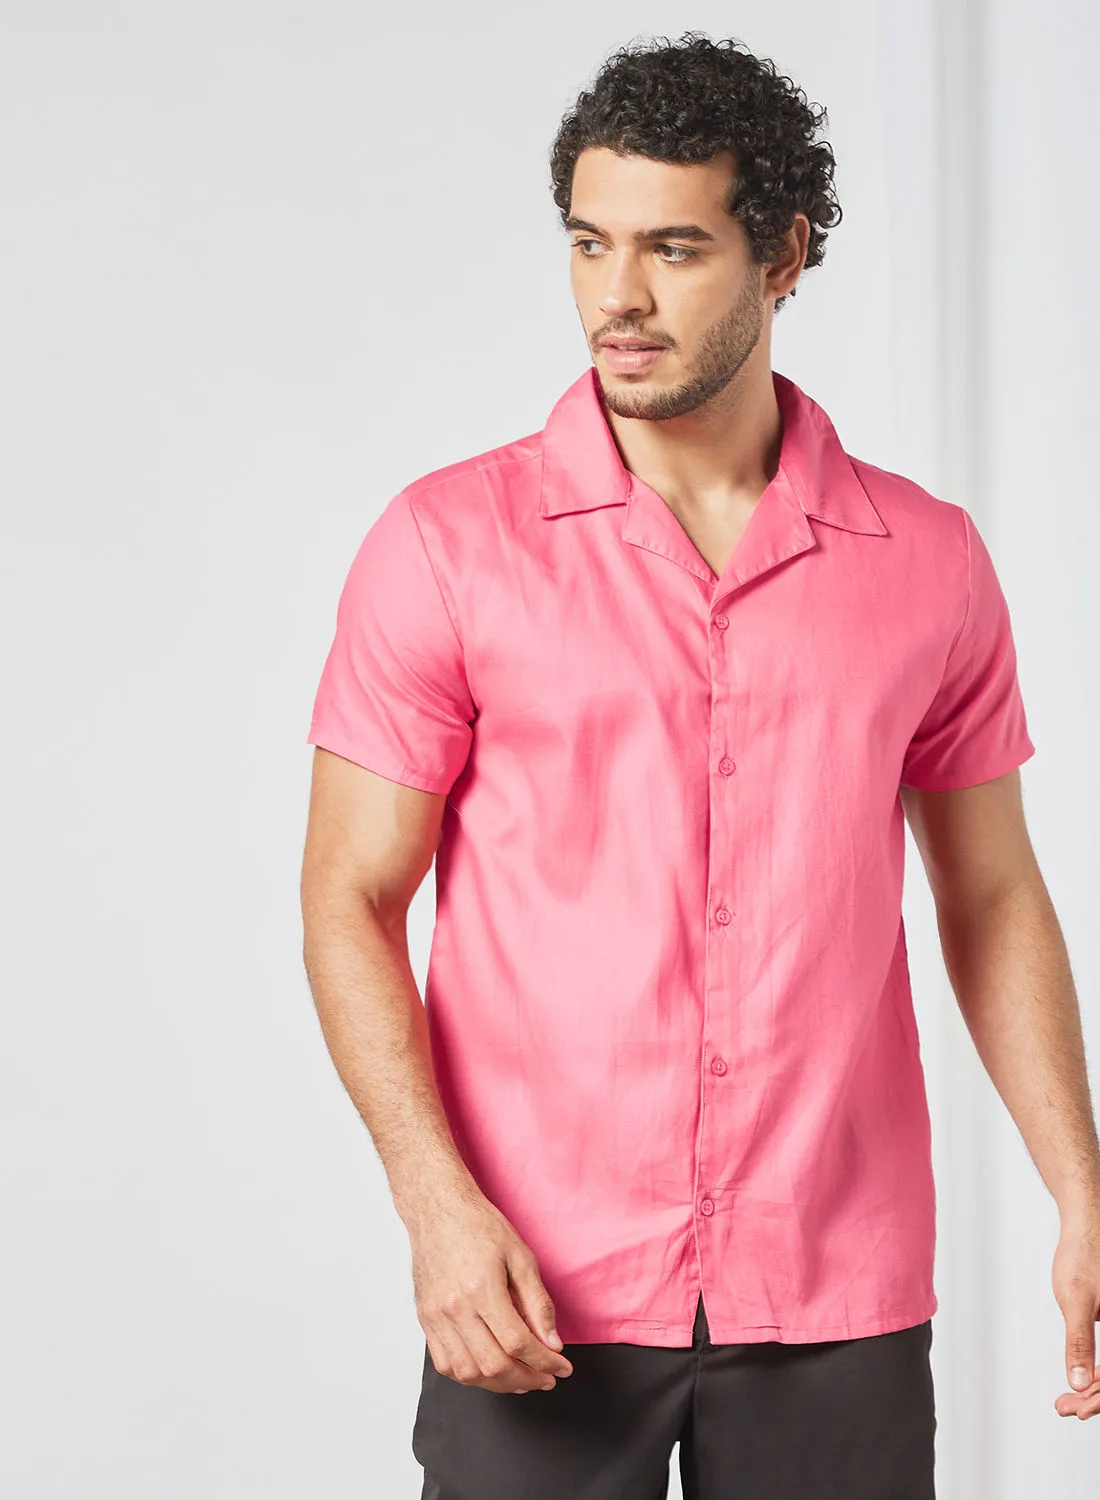 STATE 8 Casual Collared Shirt Pink